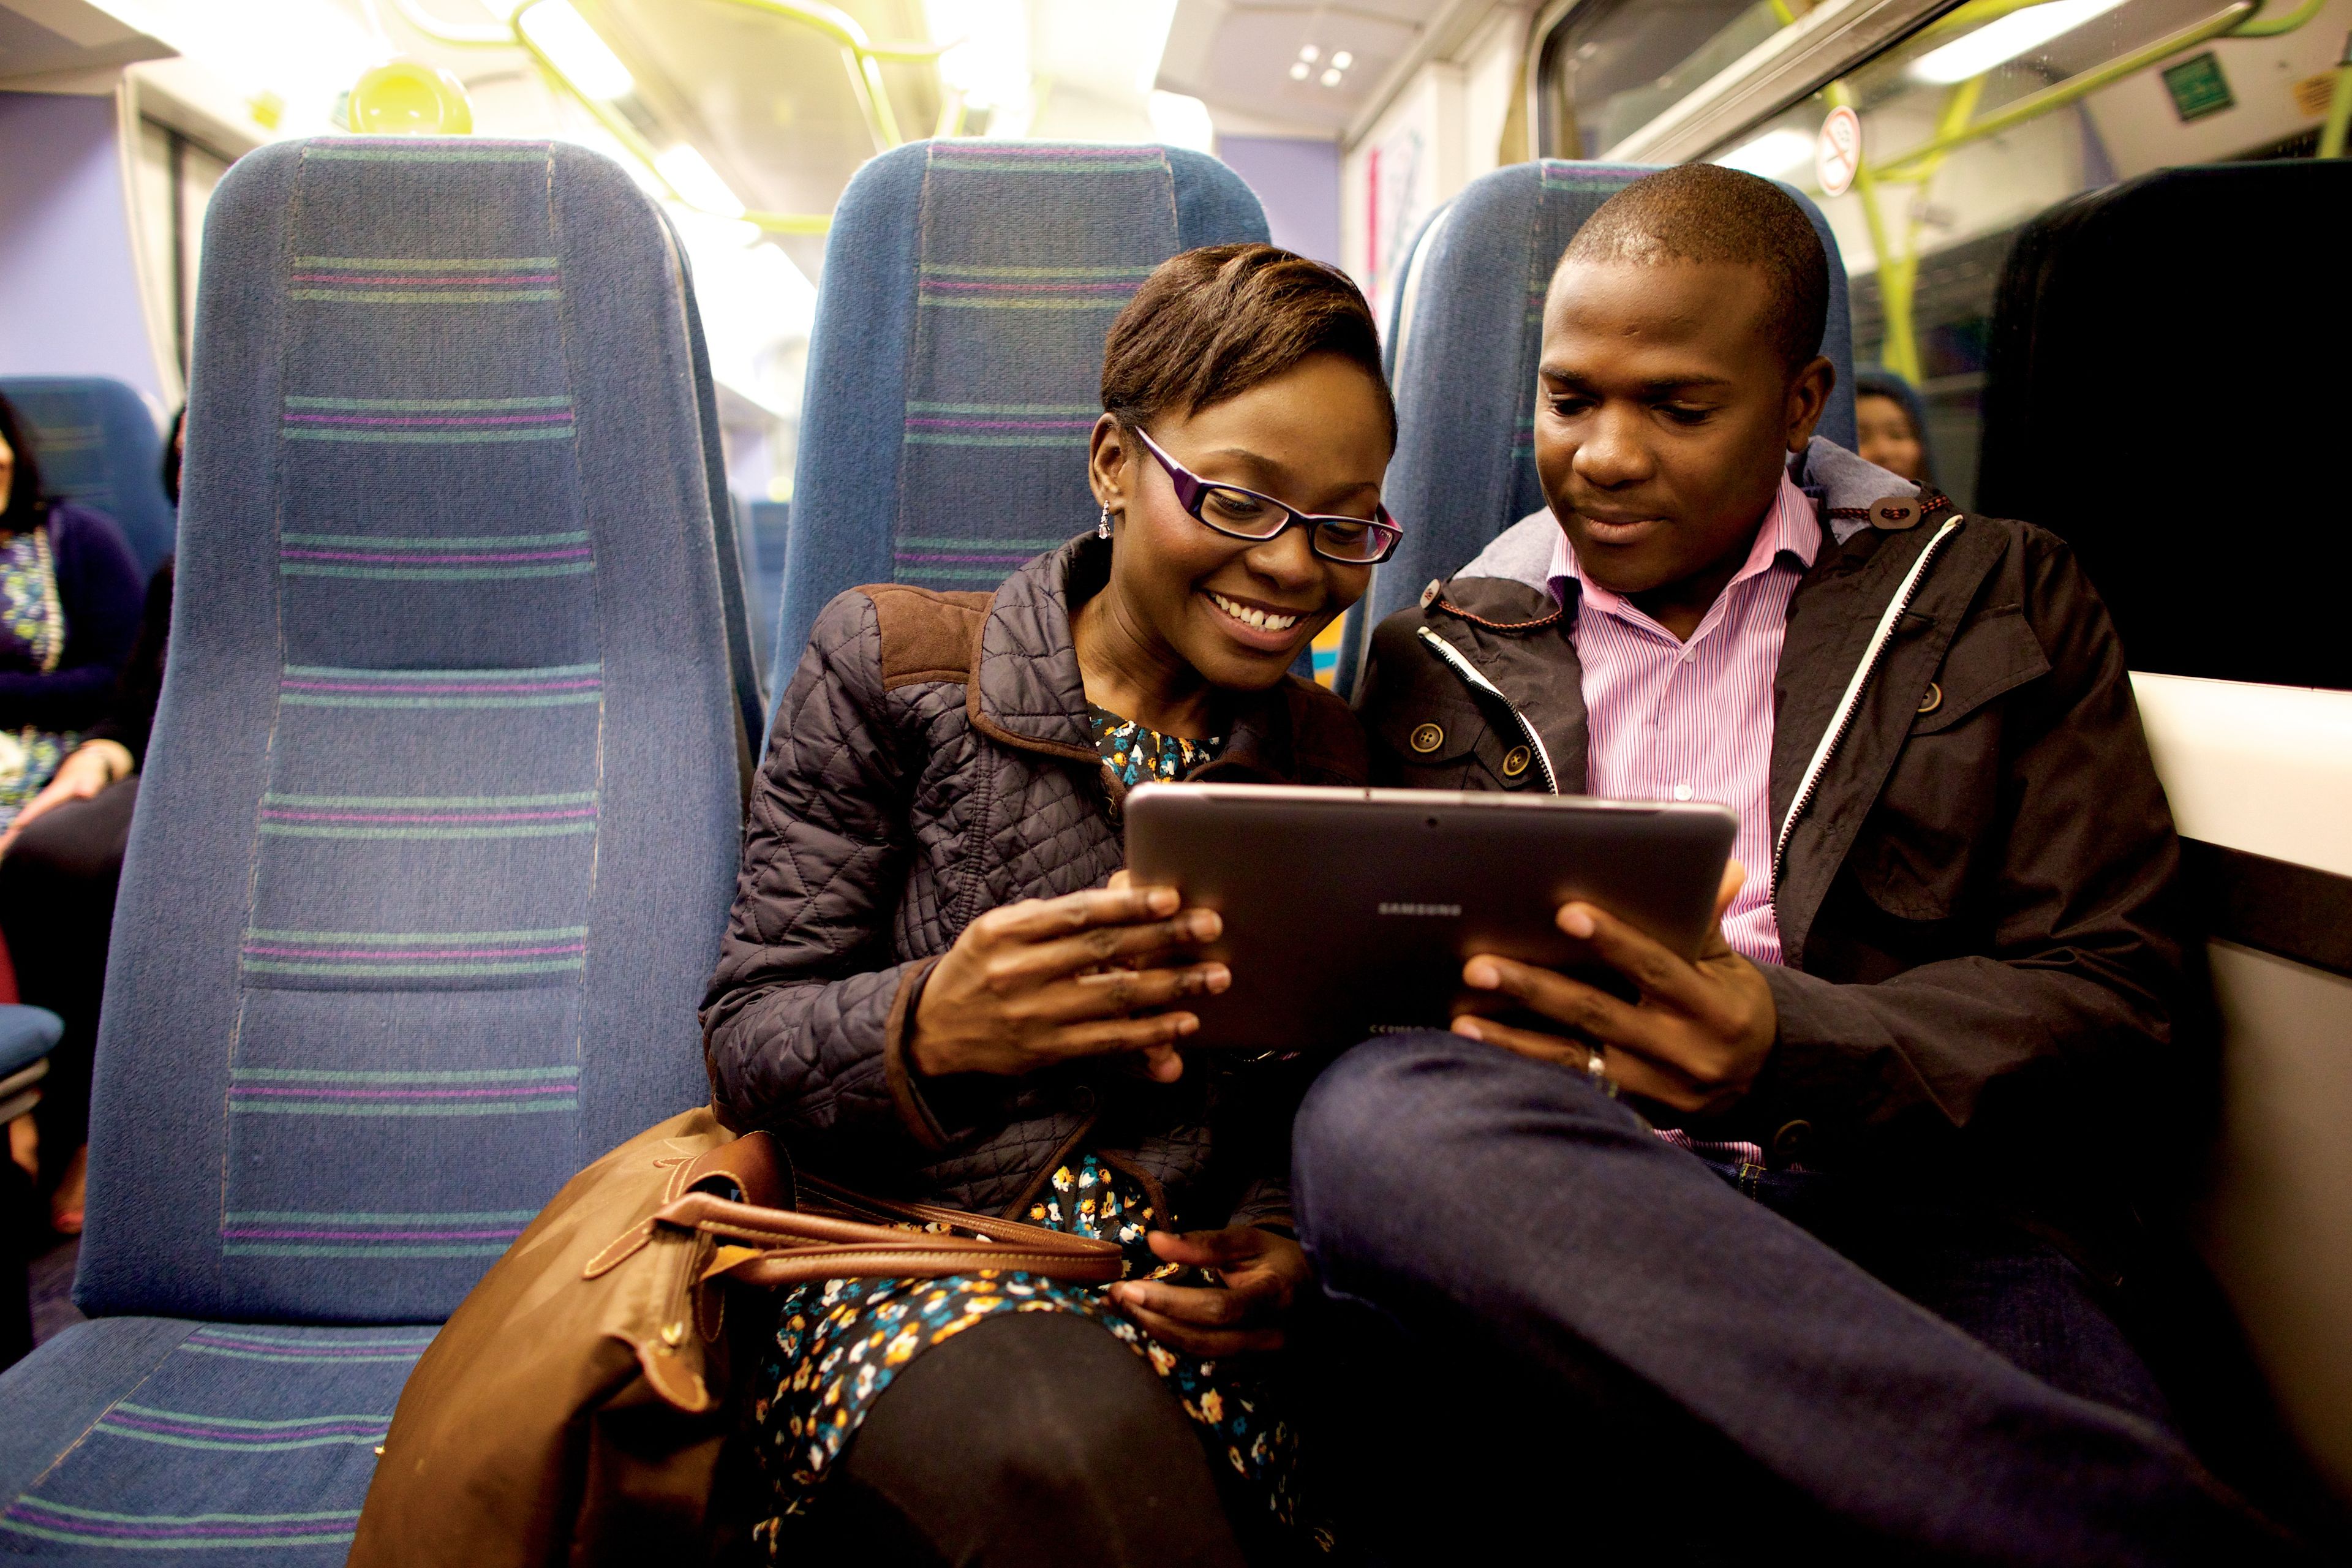 A couple sitting on a train and looking at a tablet together.